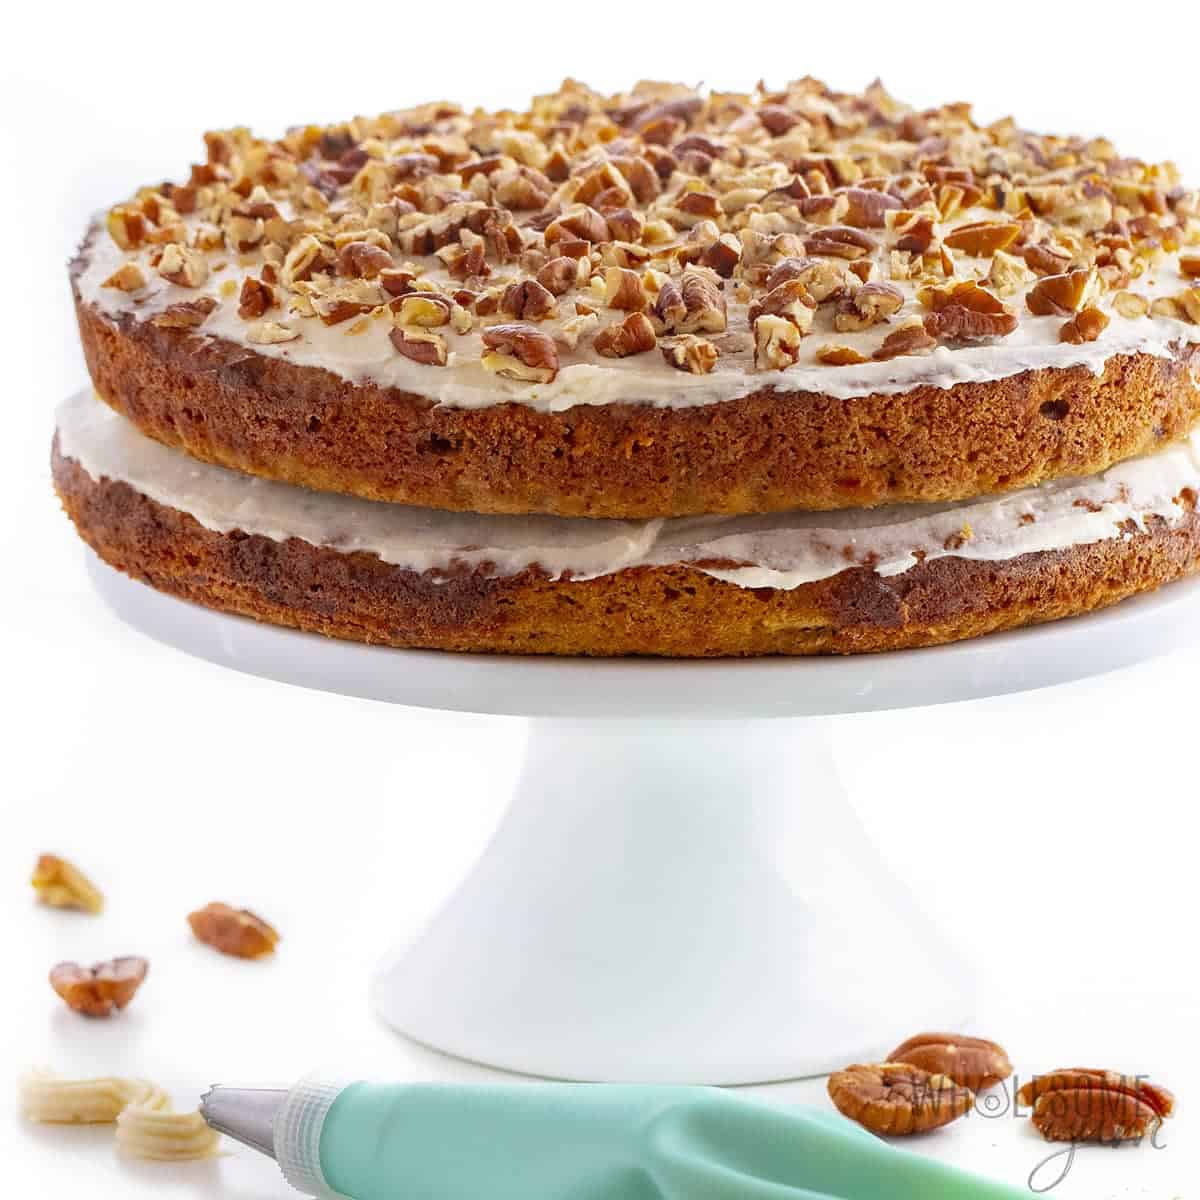 Keto friendly carrot cake on a cake stand with piping set.